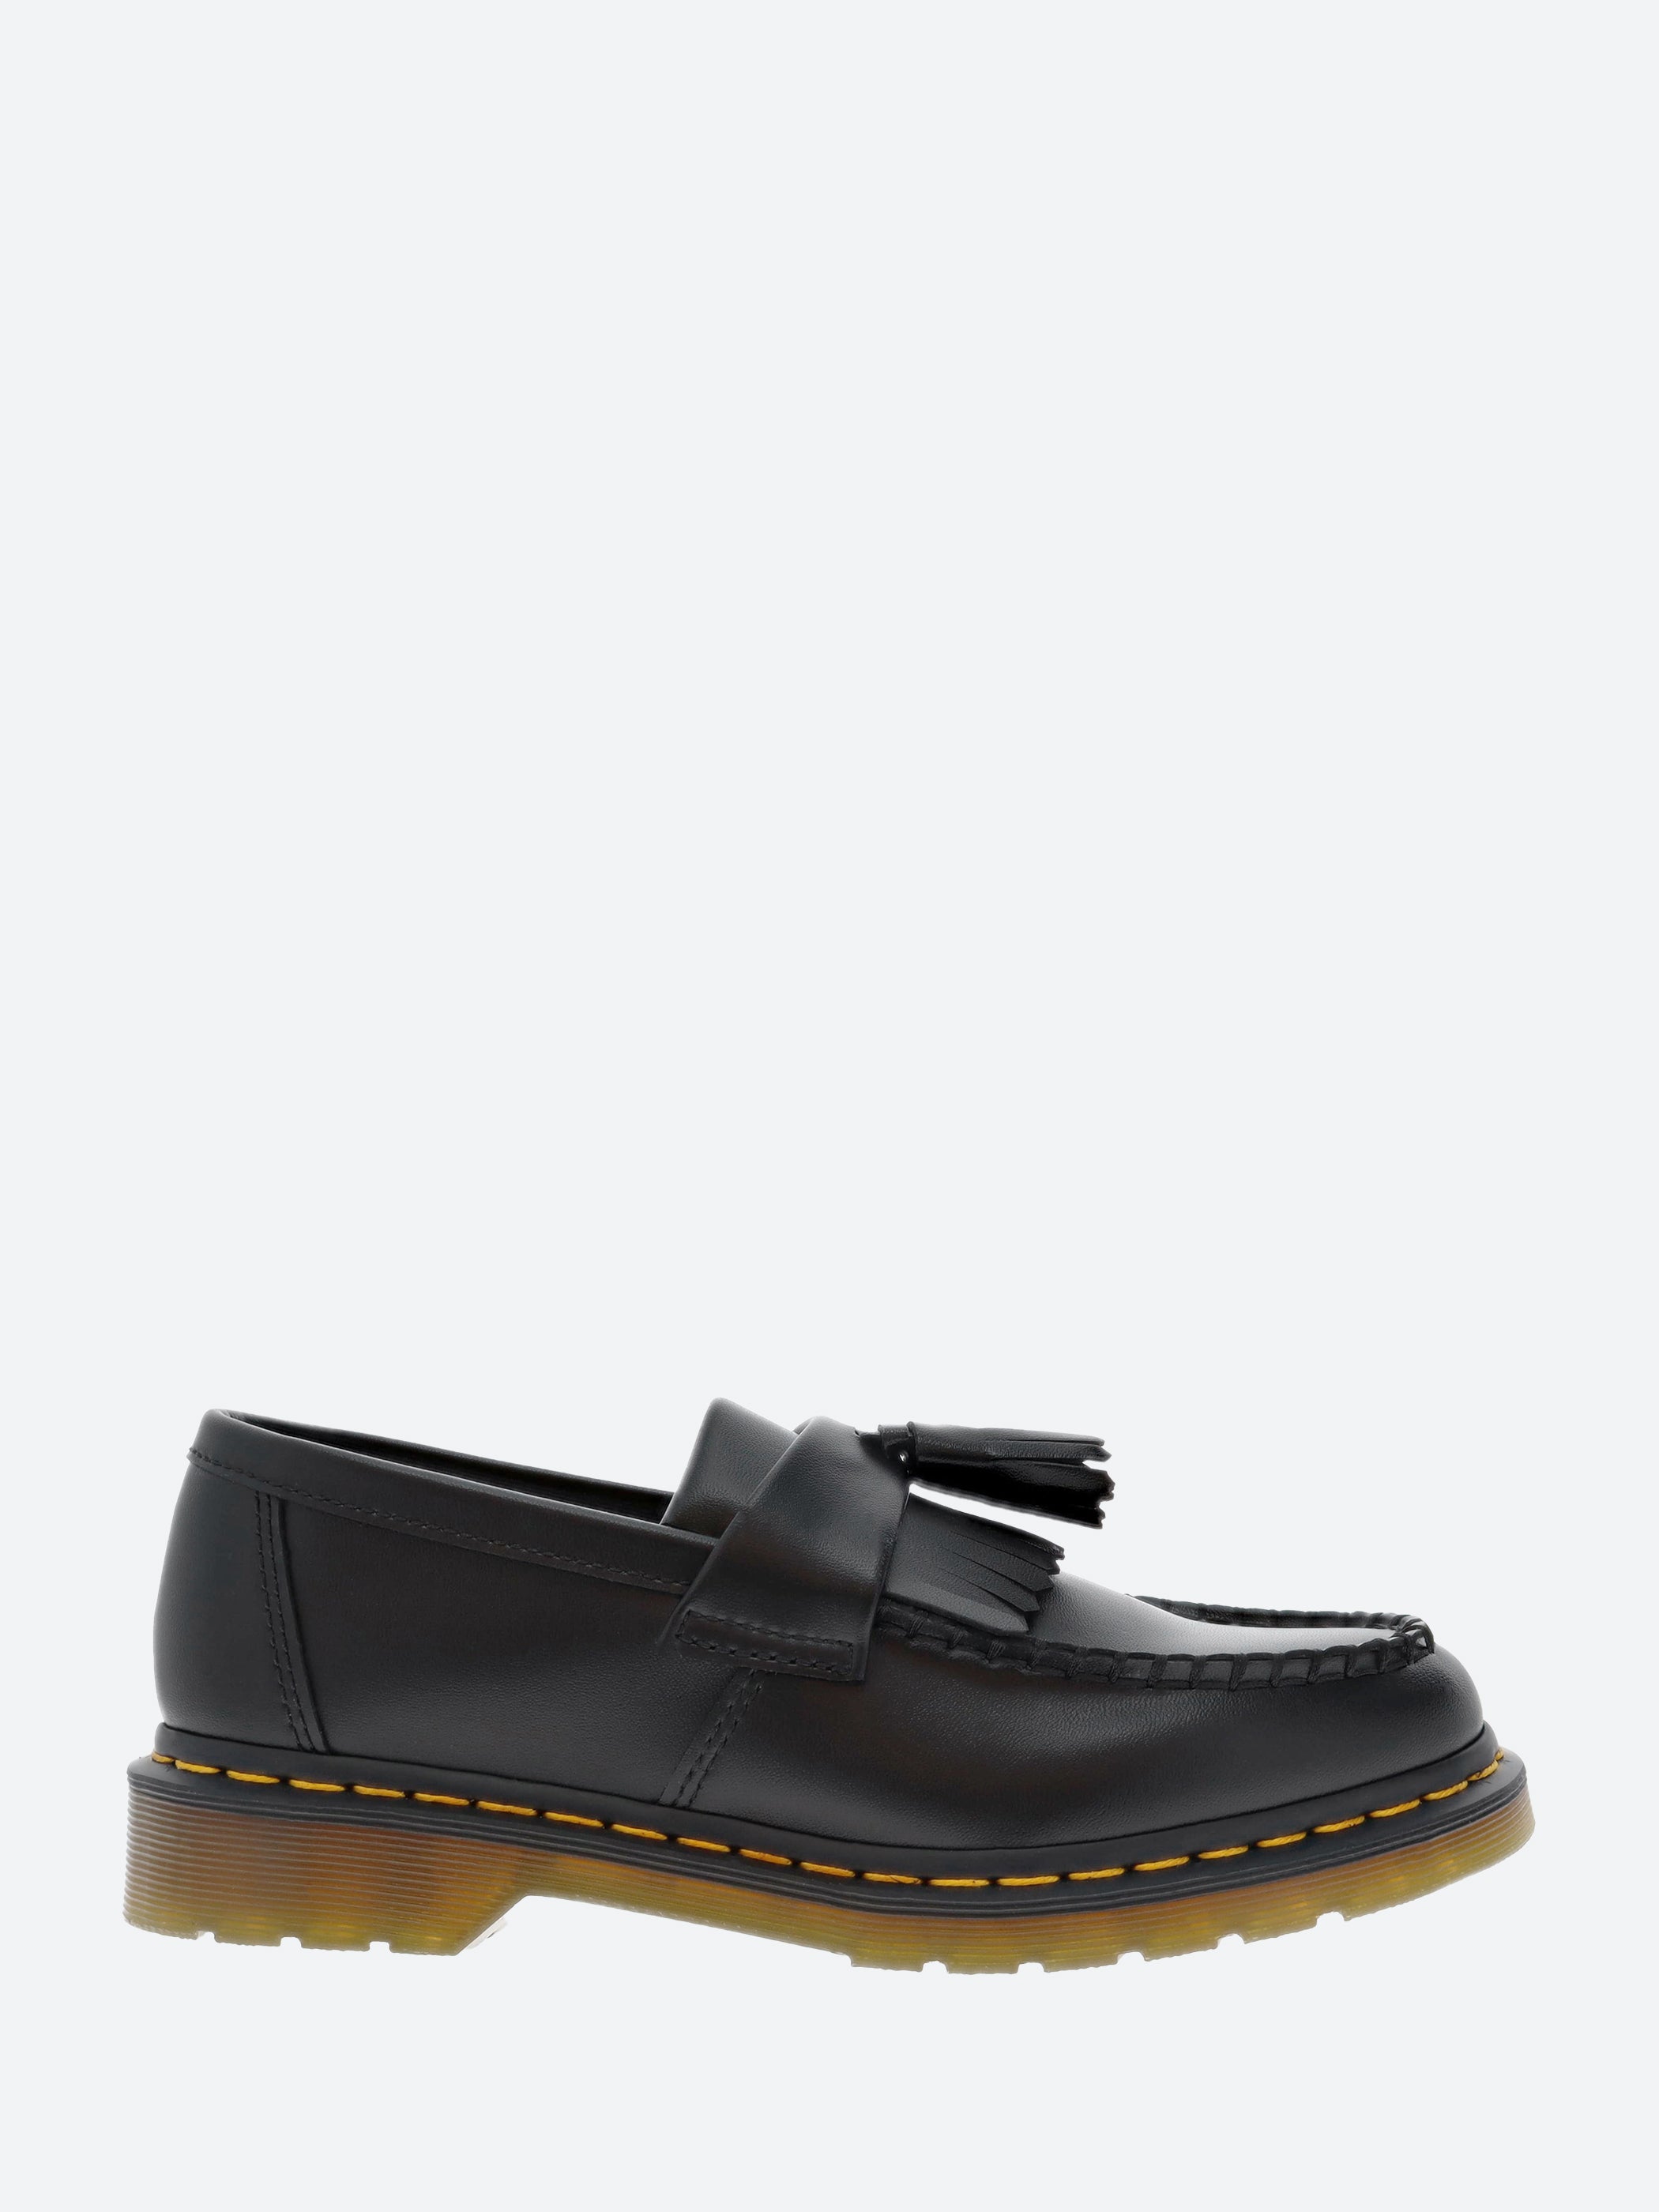 Dr. Martens - Adrian Yellow Stitch Tassel Loafers in Black Smooth 